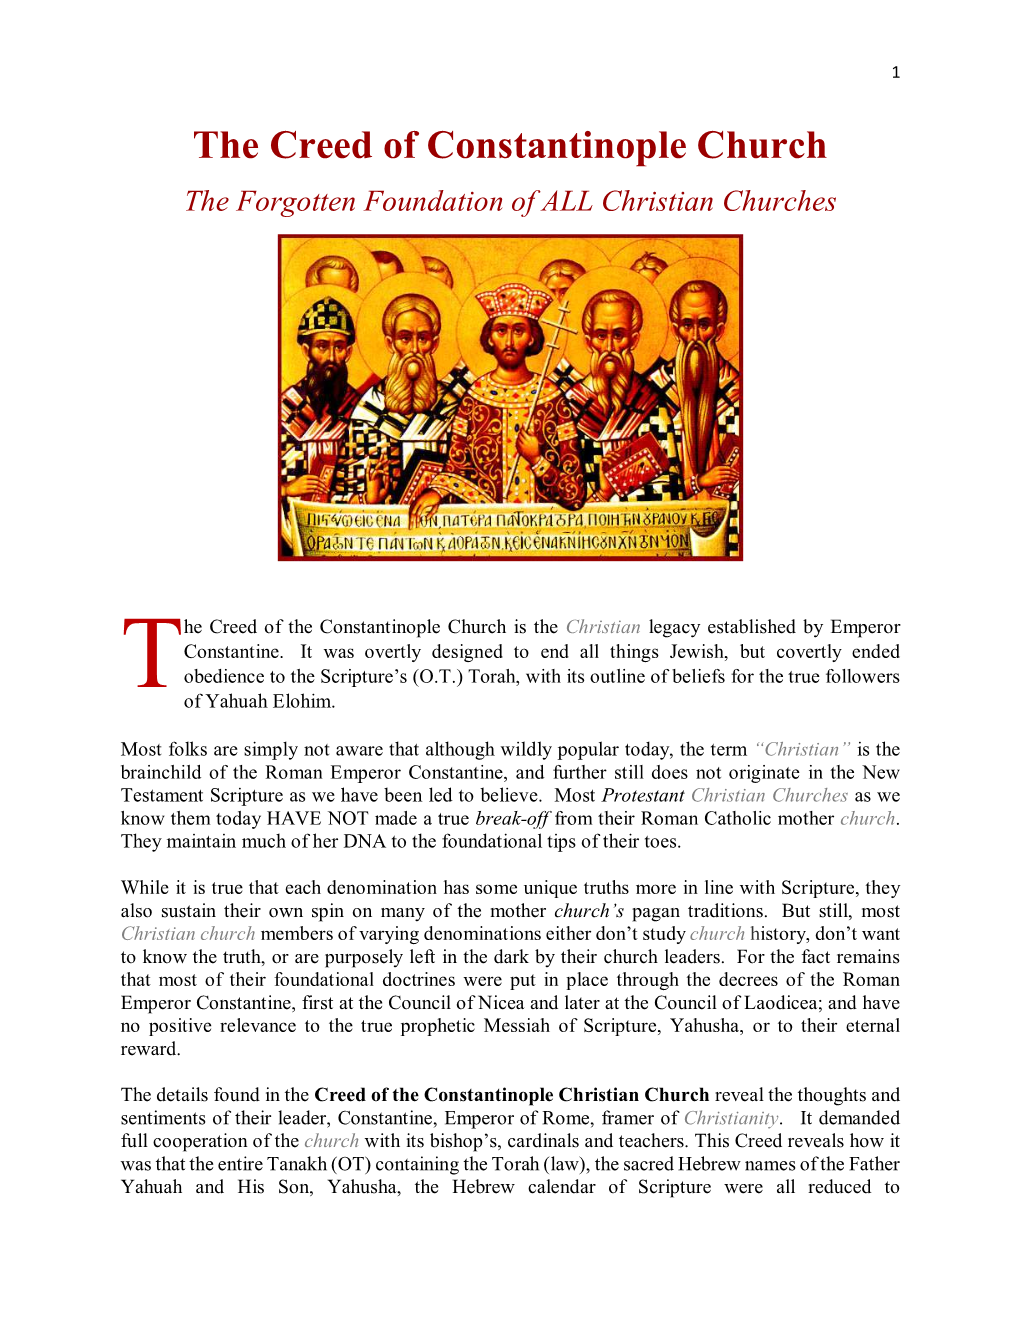 The Creed of Constantinople Church the Forgotten Foundation of ALL Christian Churches